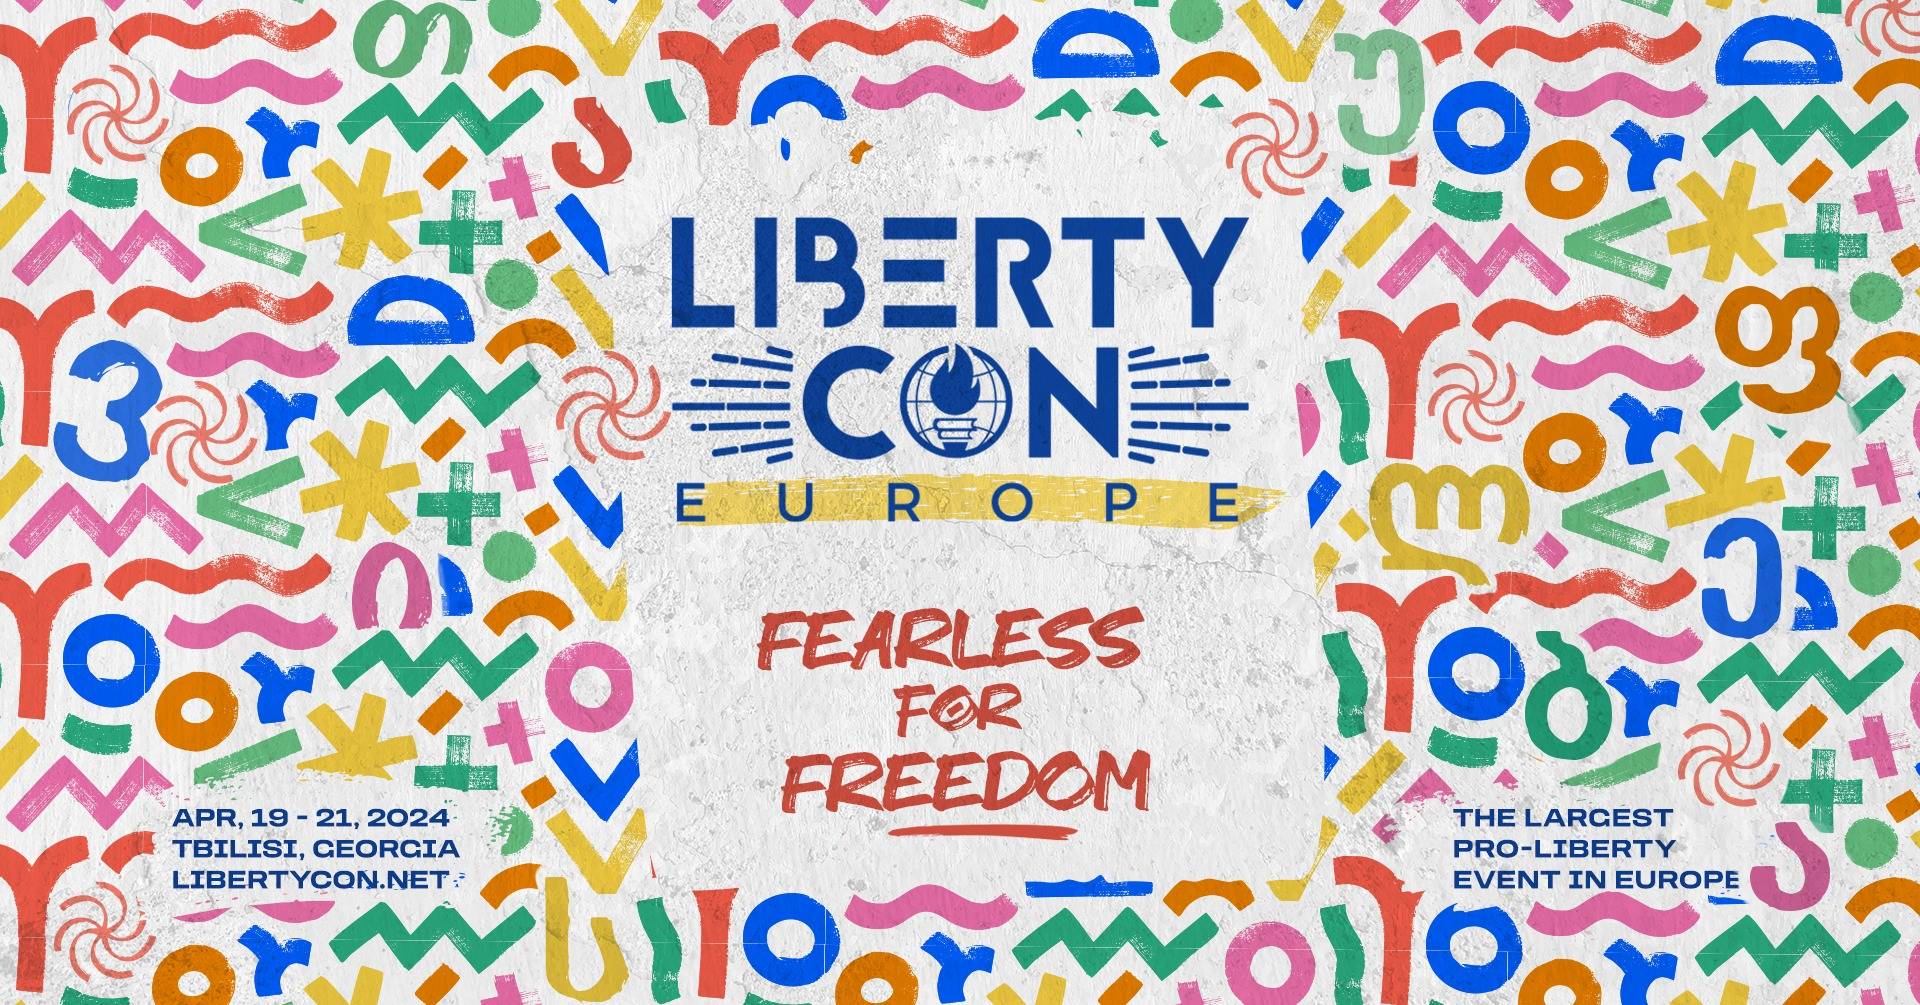 Europe’s largest pro-liberty event is coming to Tbilisi, Georgia!